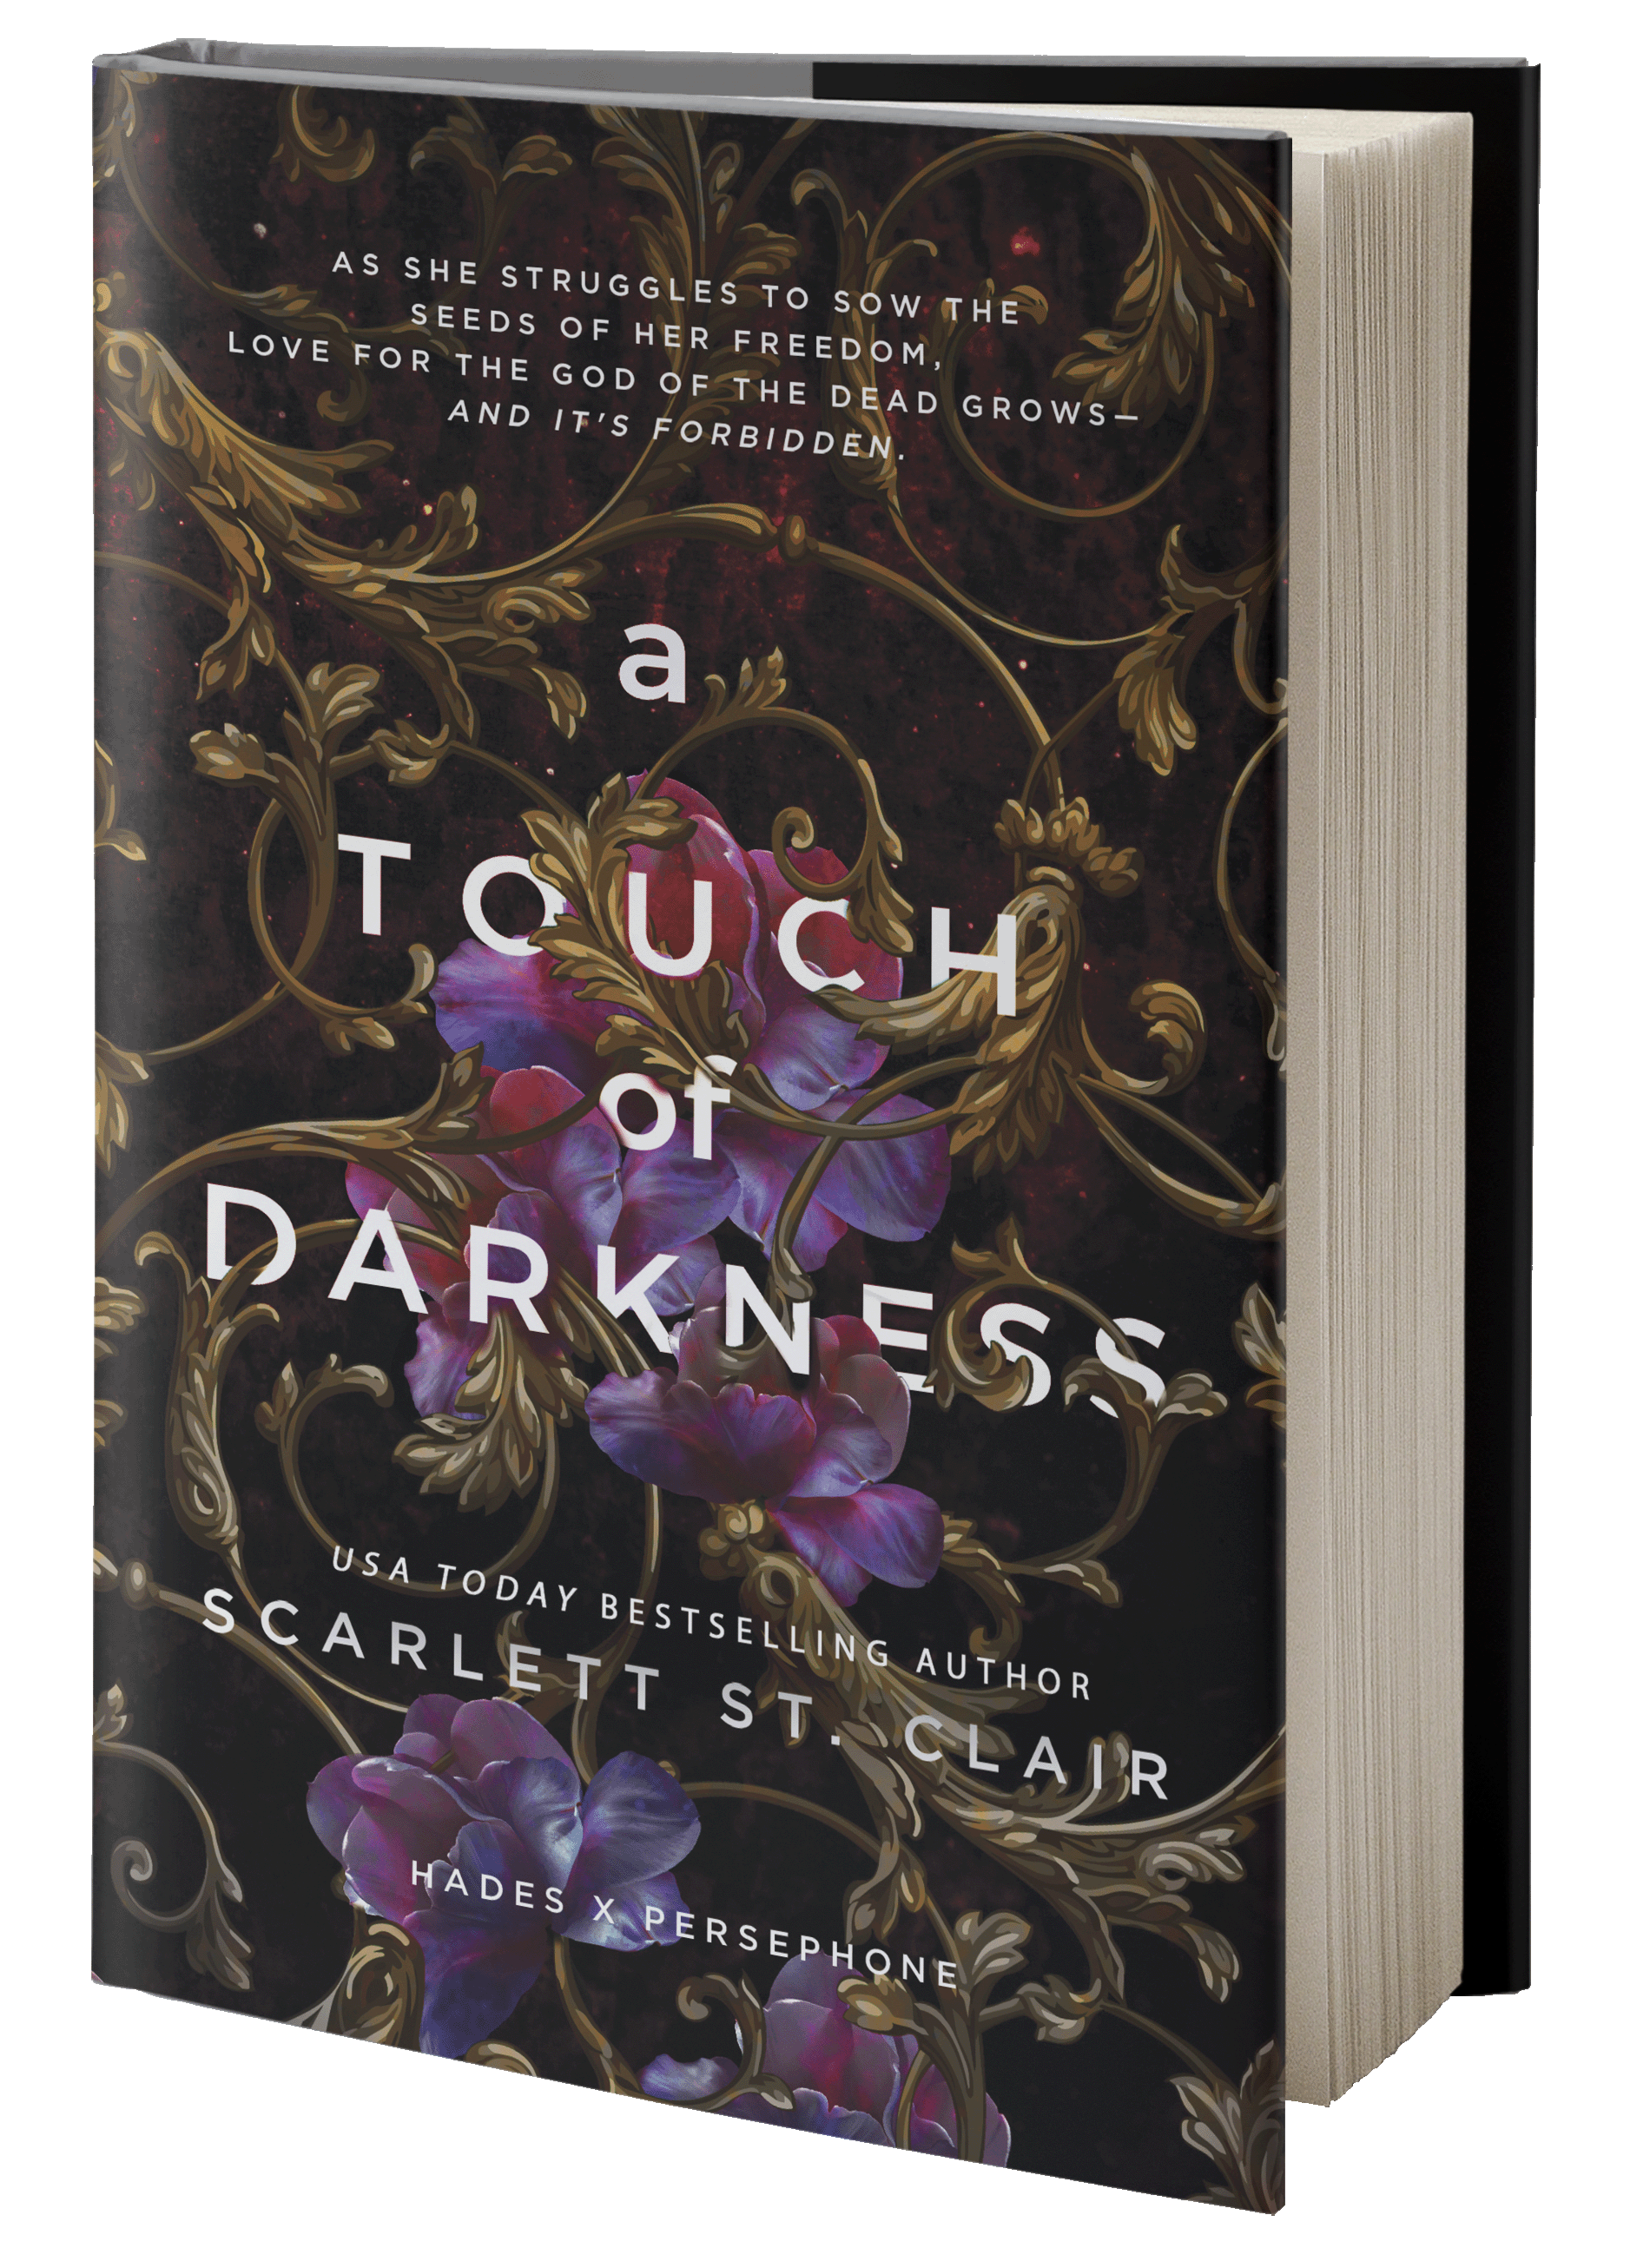 Book cover of "A Touch of Darkness"